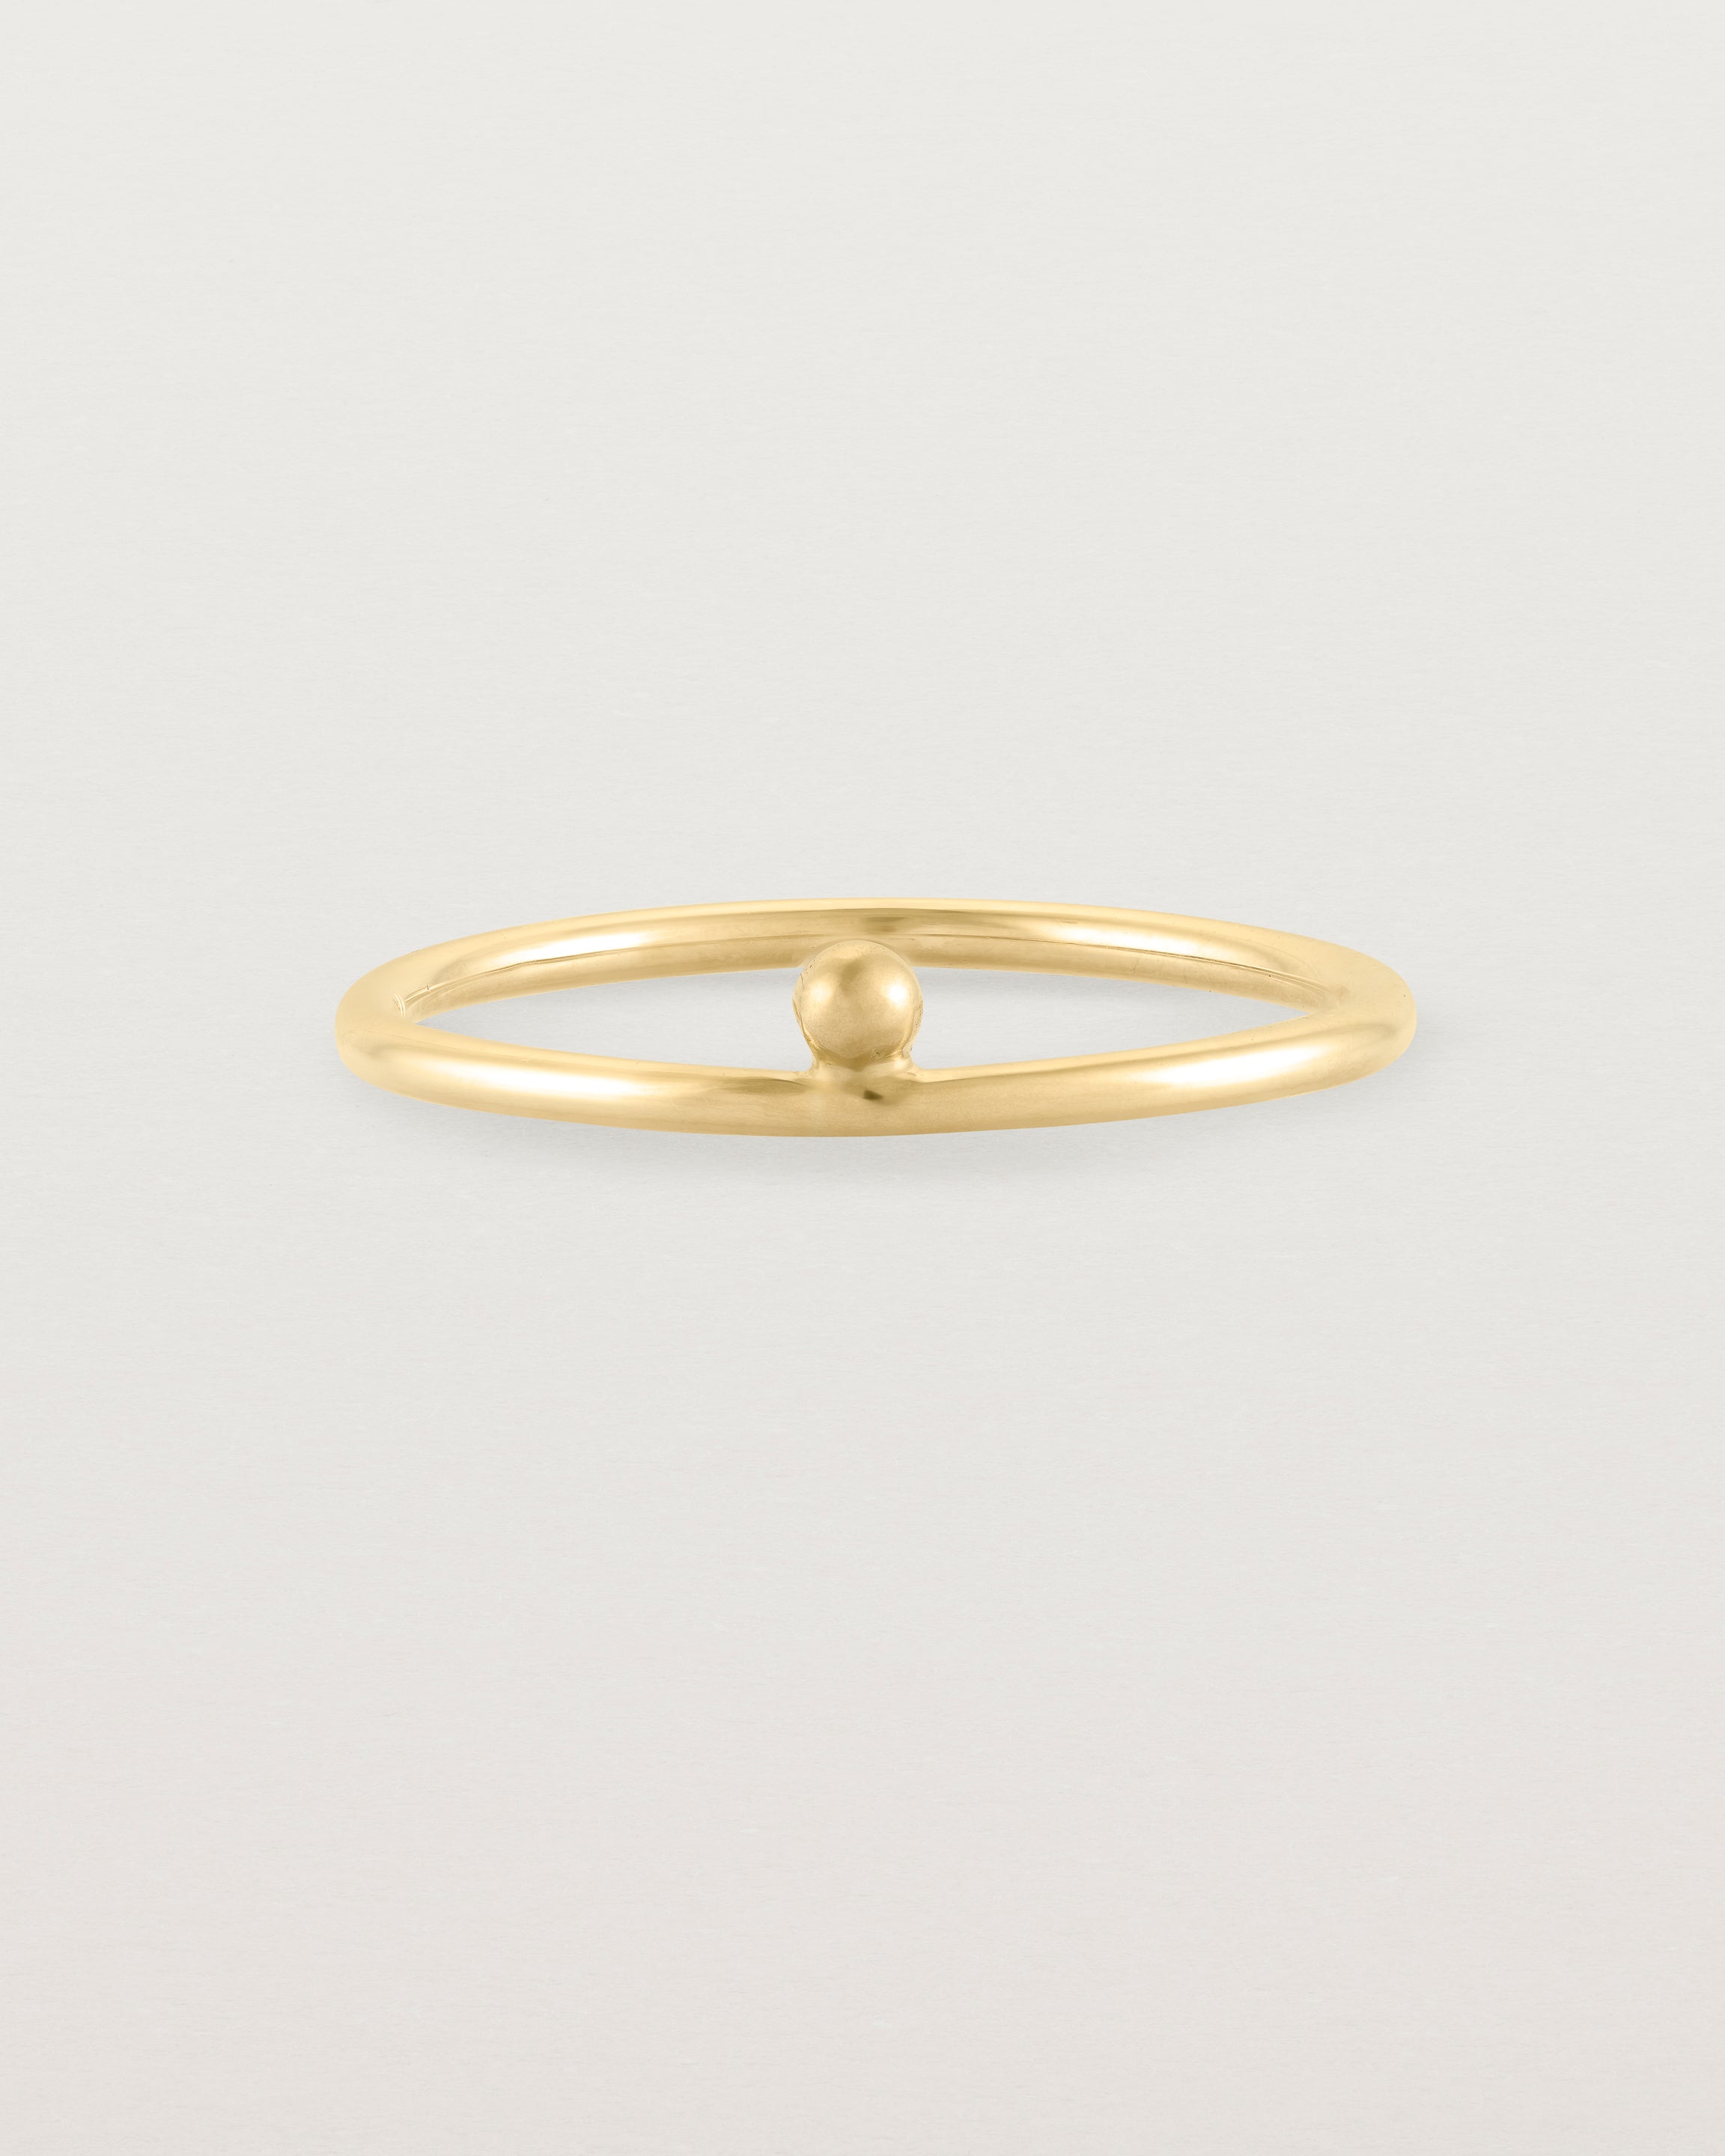 yellow gold fine ring with a single dot detail